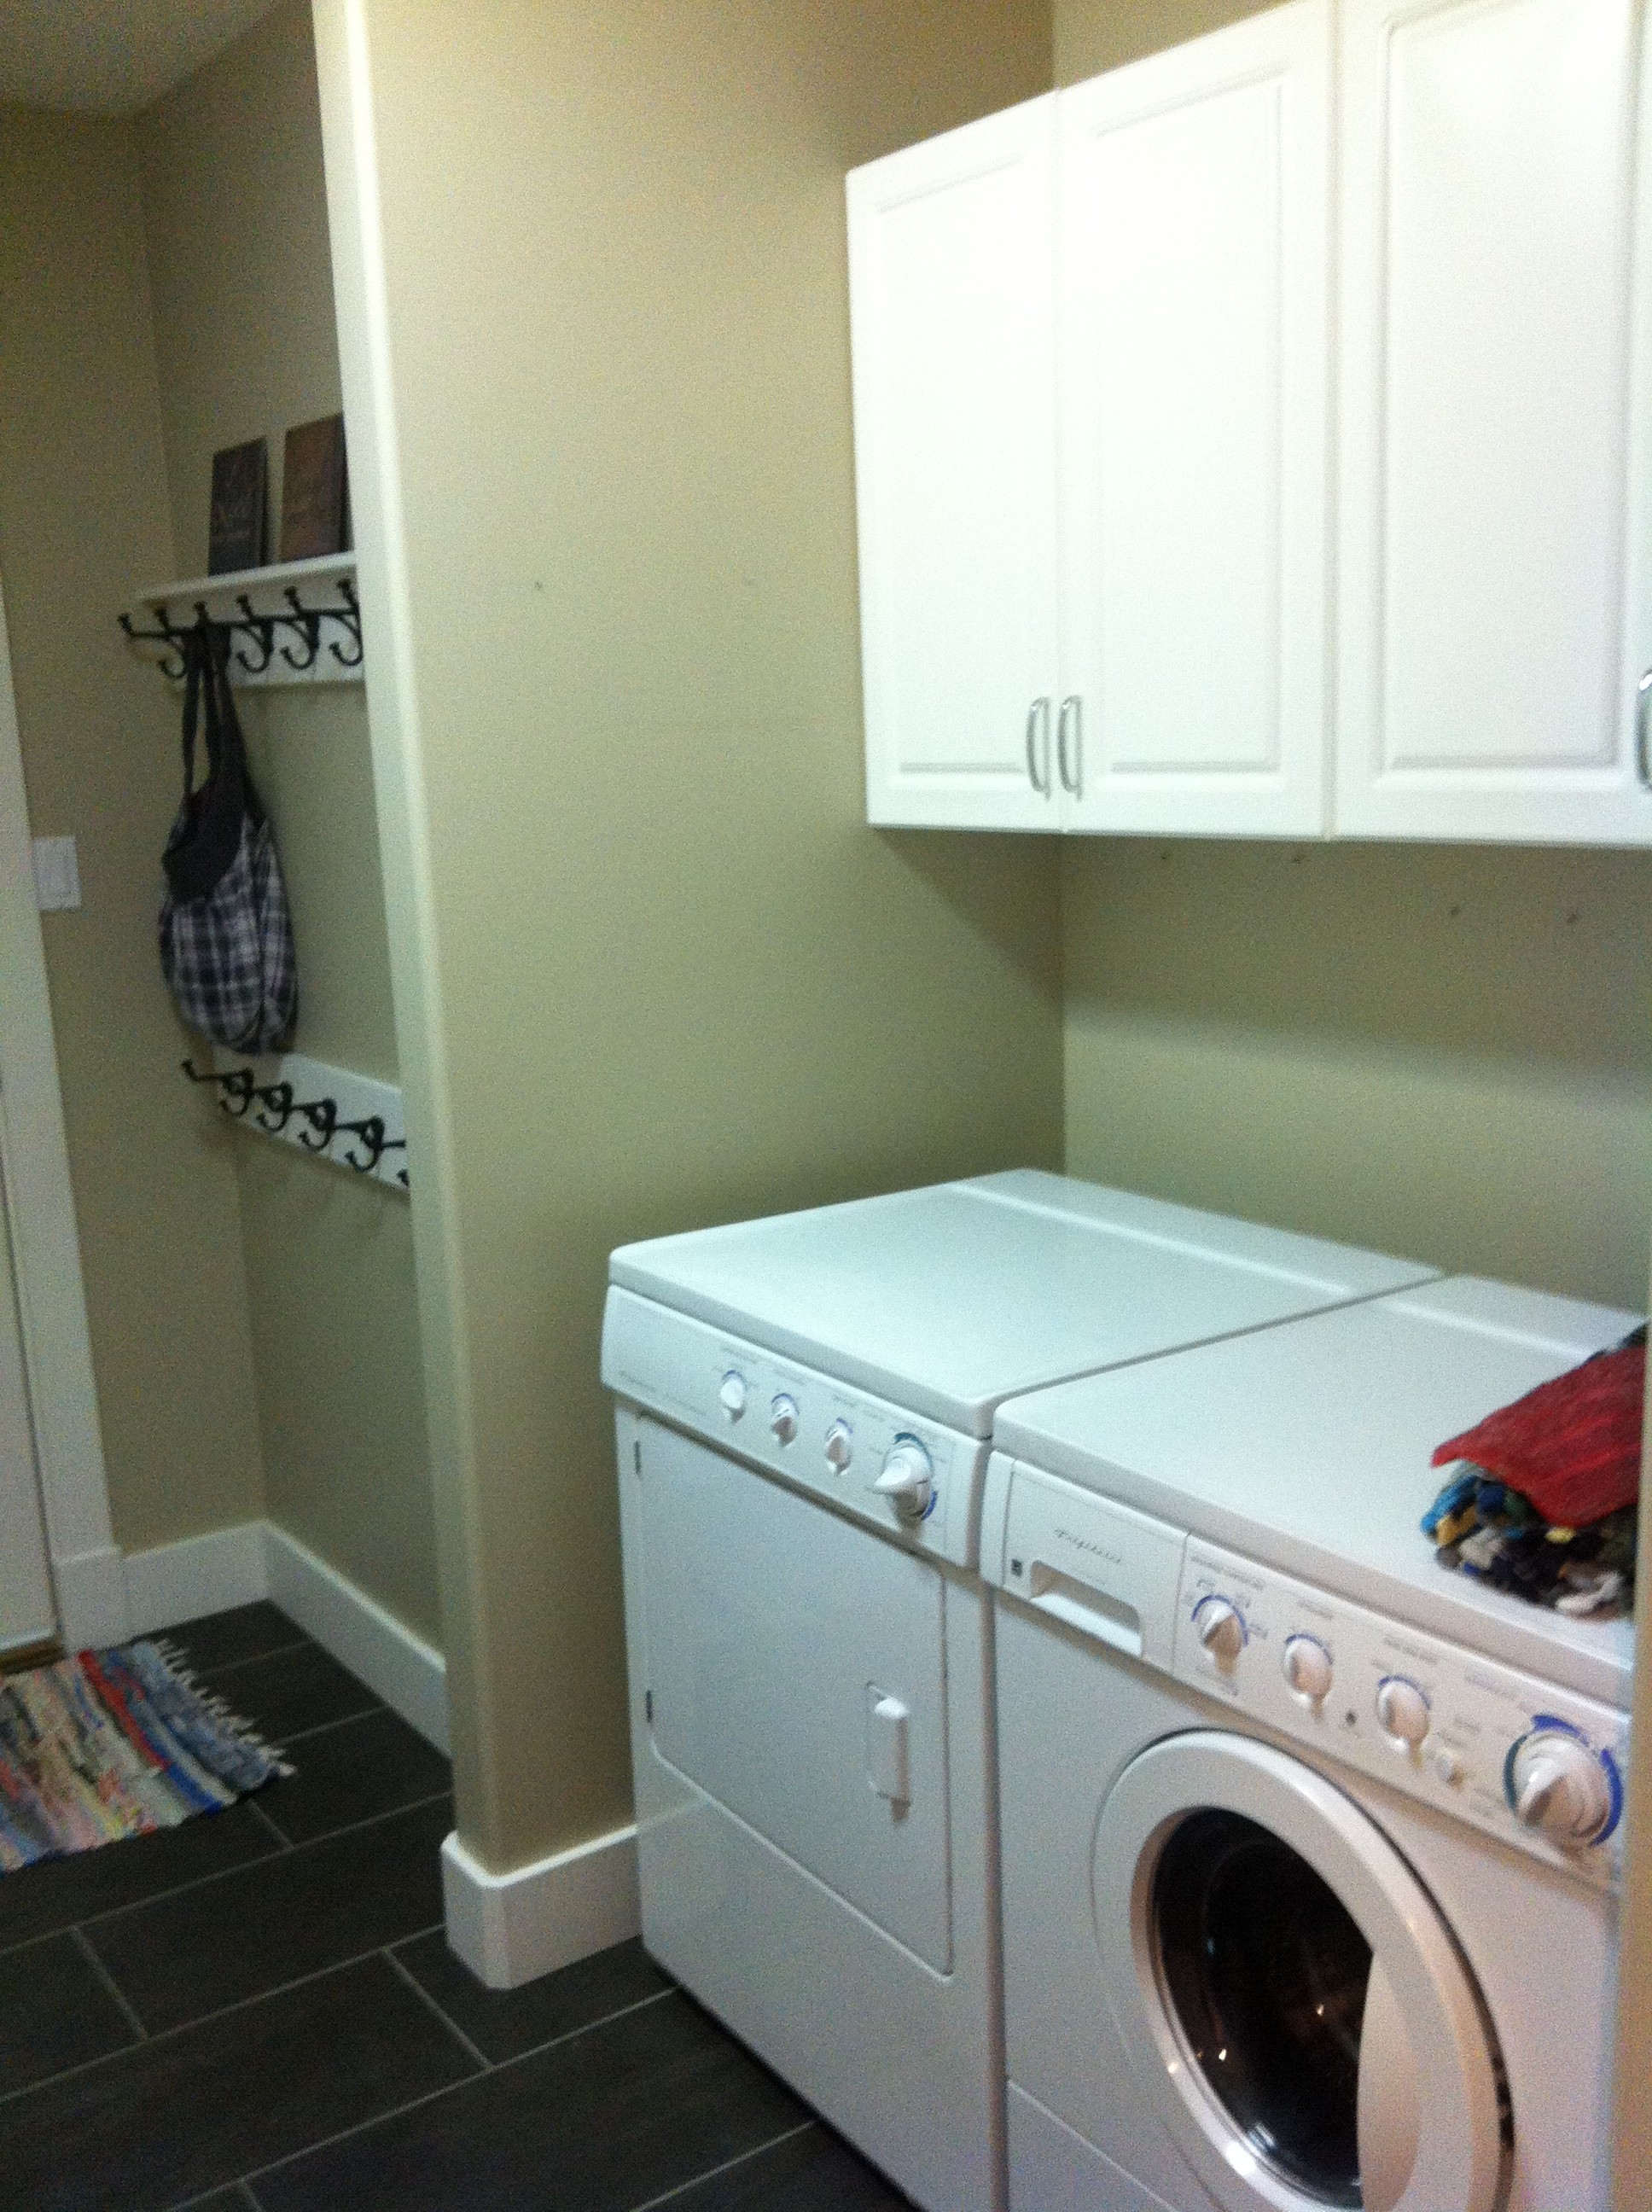 How-To Revamp a Laundry Room / Mud Room on a Budget - The Happy Housie